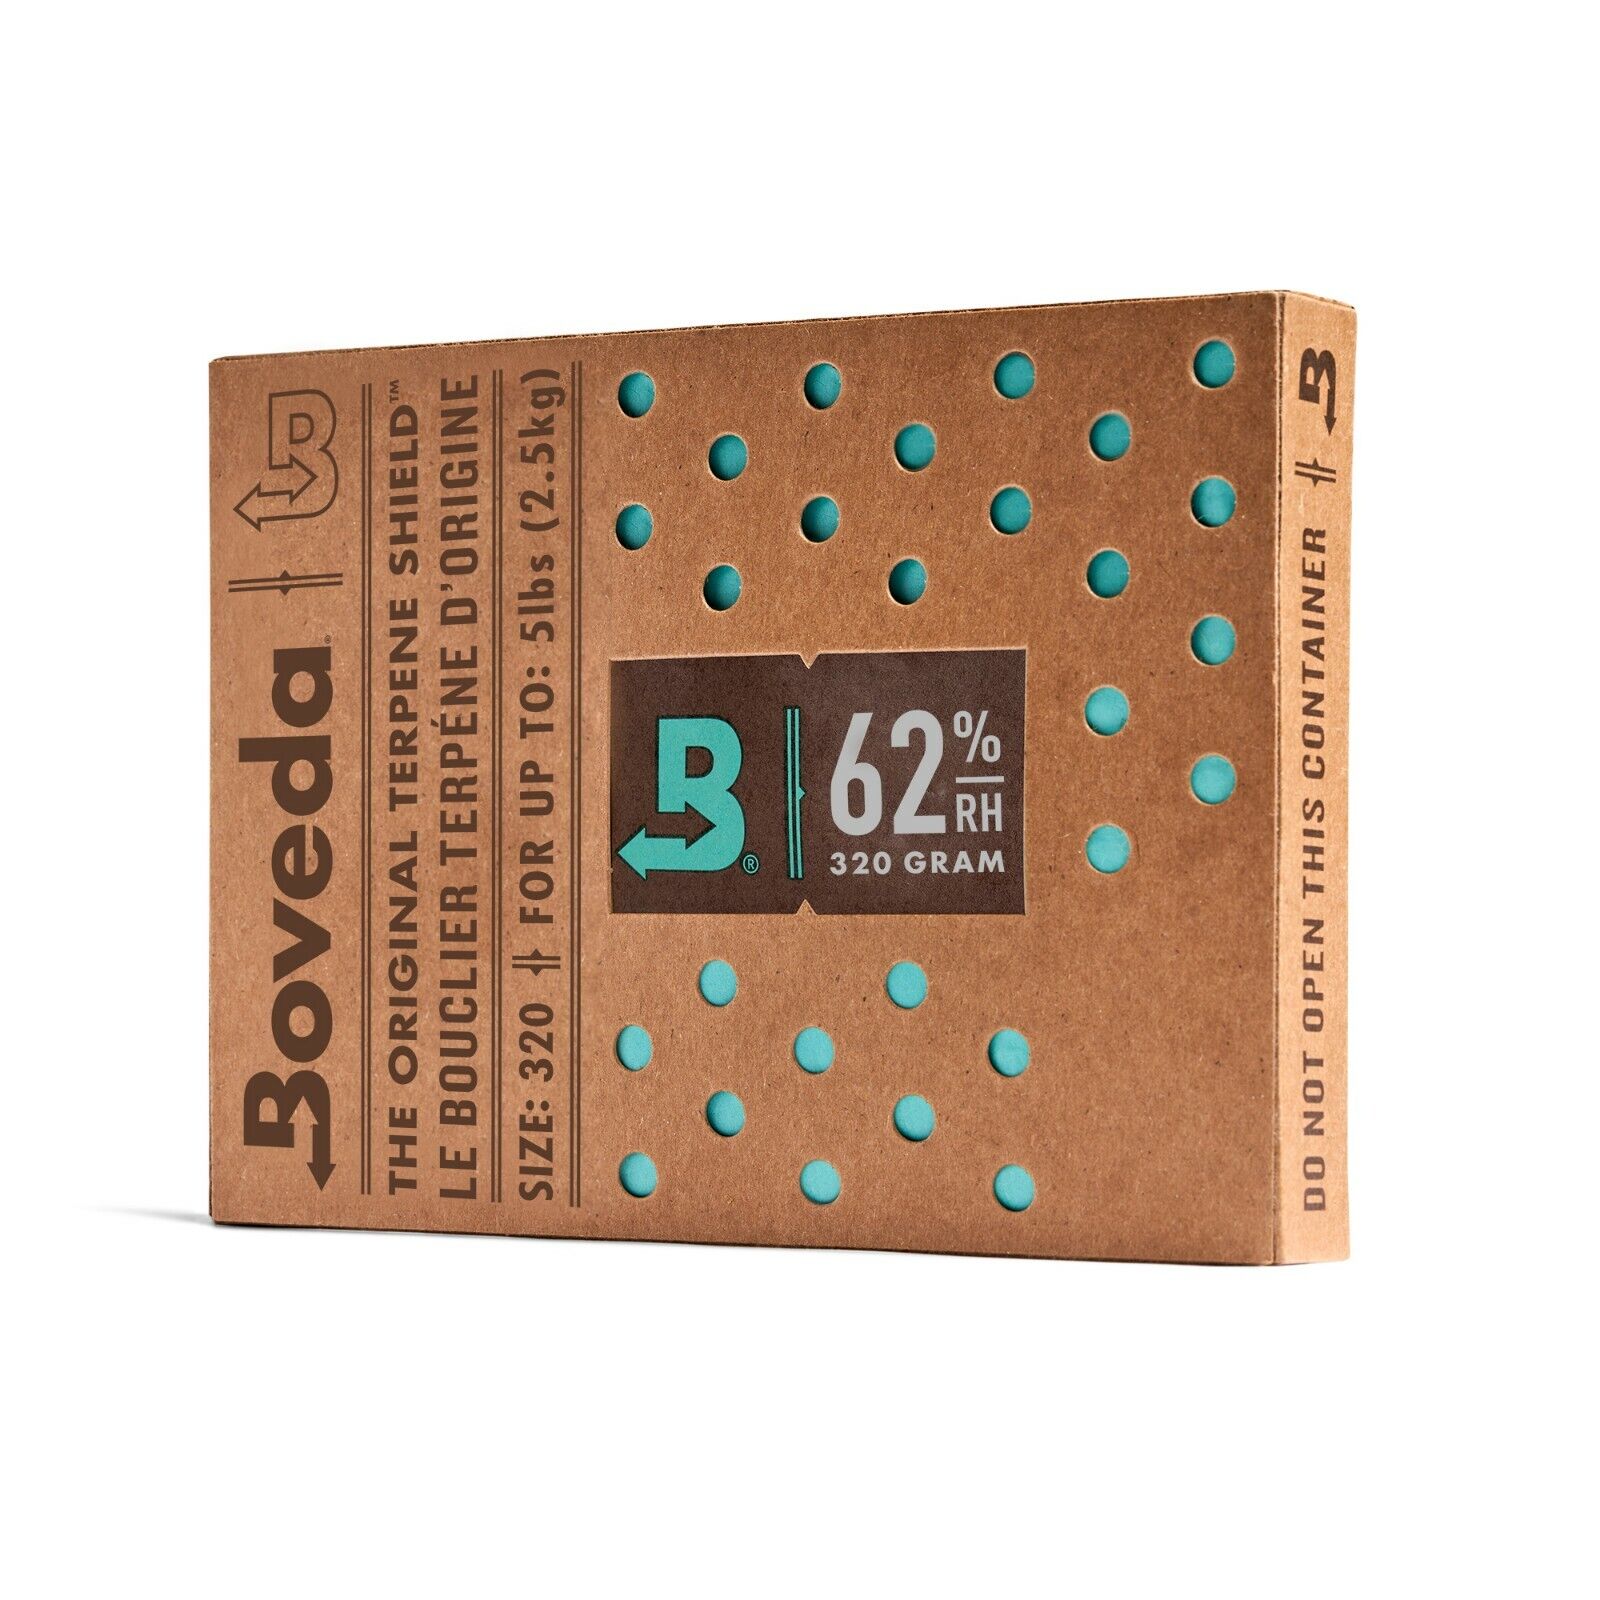 Boveda 62% RH 2-Way Humidity Control - Protects & Restores - Size 320 - 1 Count